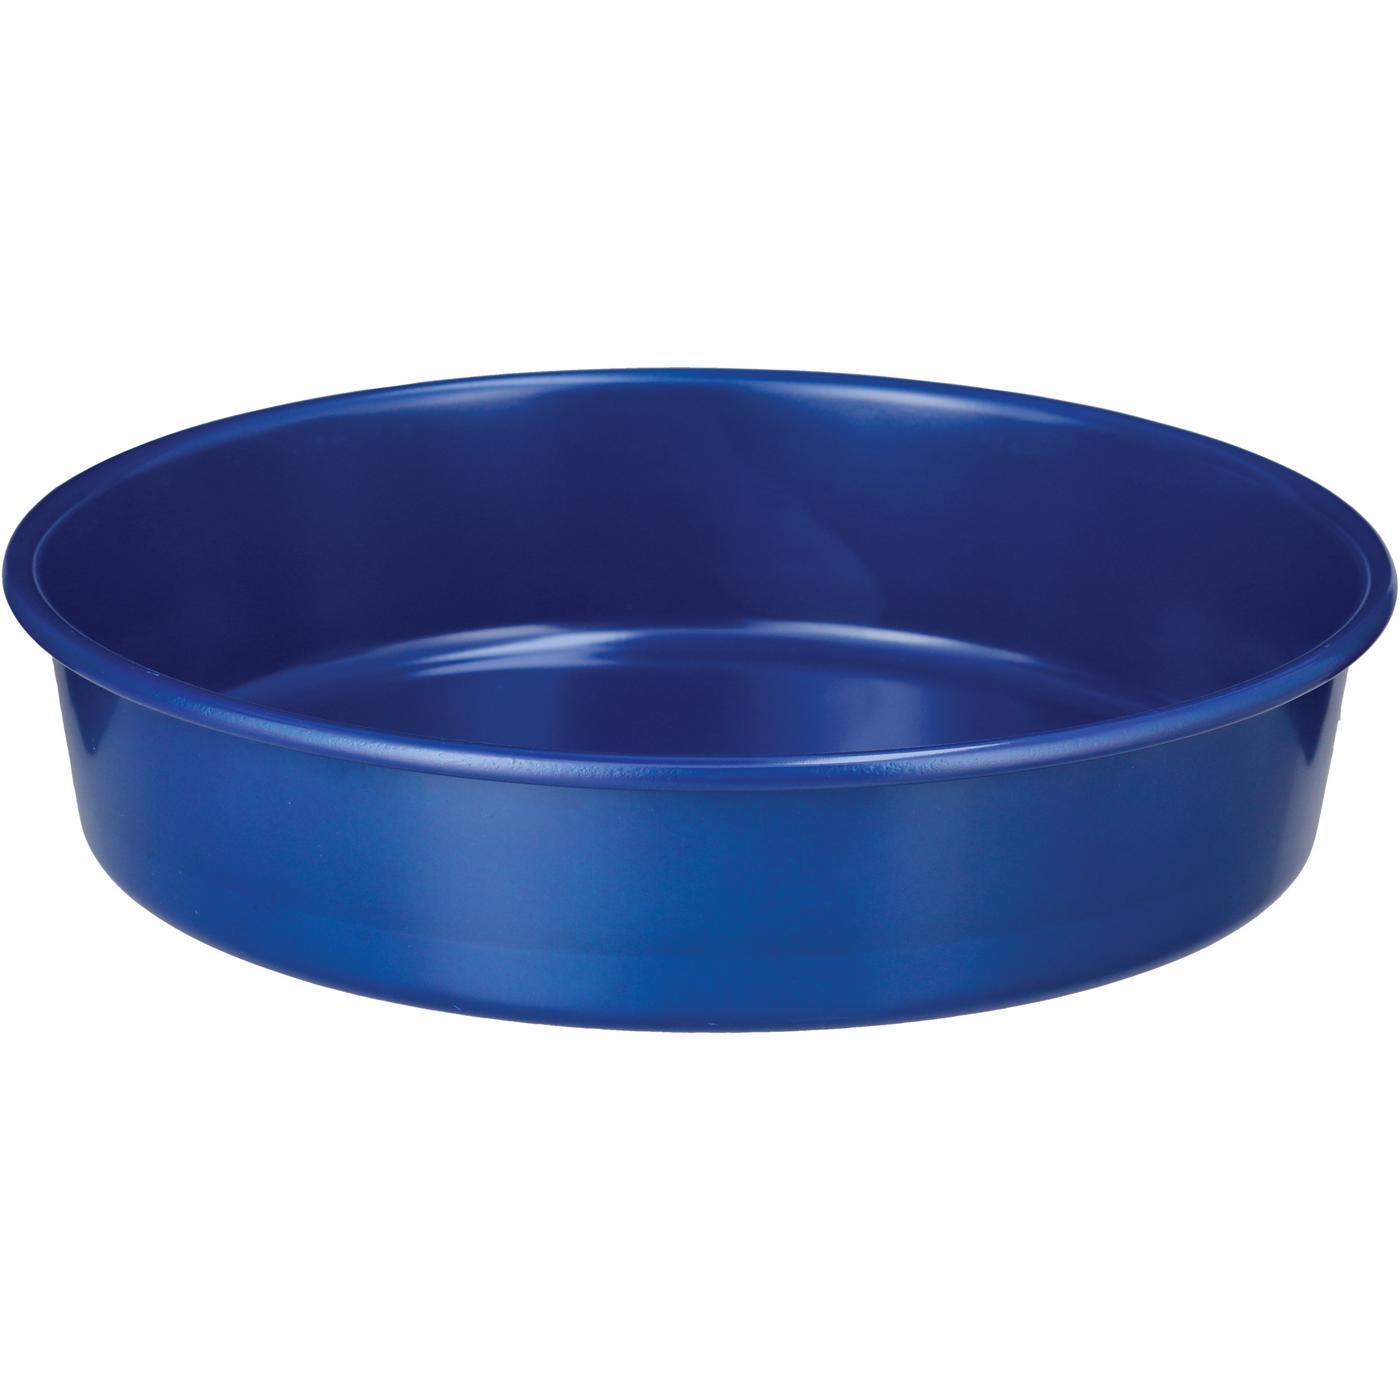 Destination Holiday Summer Round Metal Cake Pan - Blue - Shop Pans & Dishes  at H-E-B